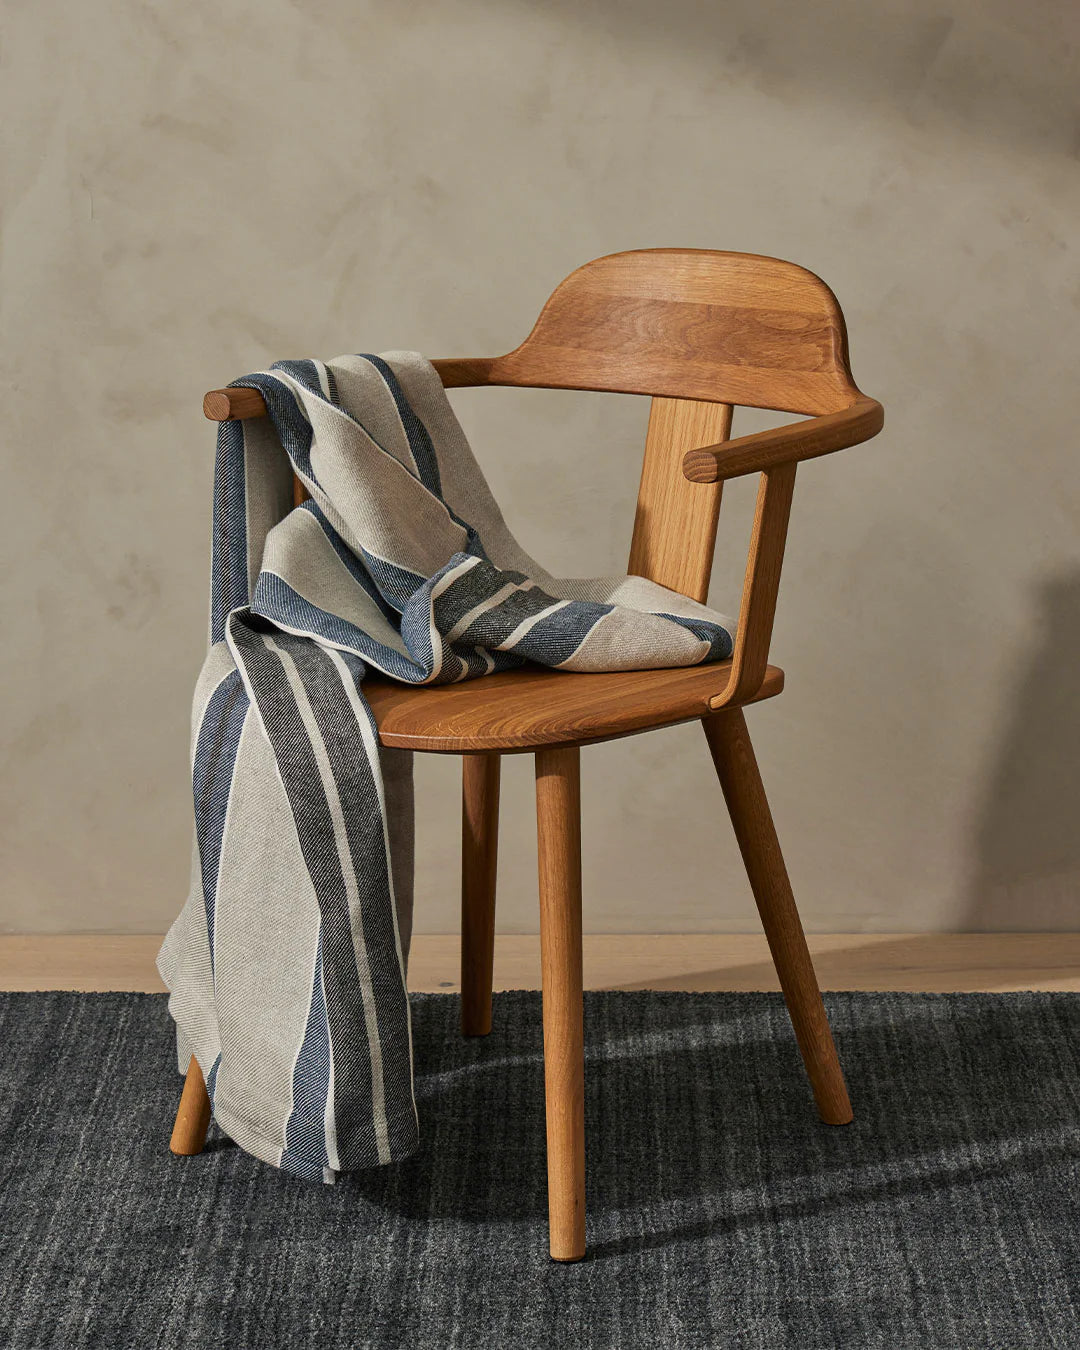 Franco throw in denim is made from 100% linen.  The Denim colourway of Franco offers a cooler option, bringing a calming blue that is perfect for a coastal look and feel.